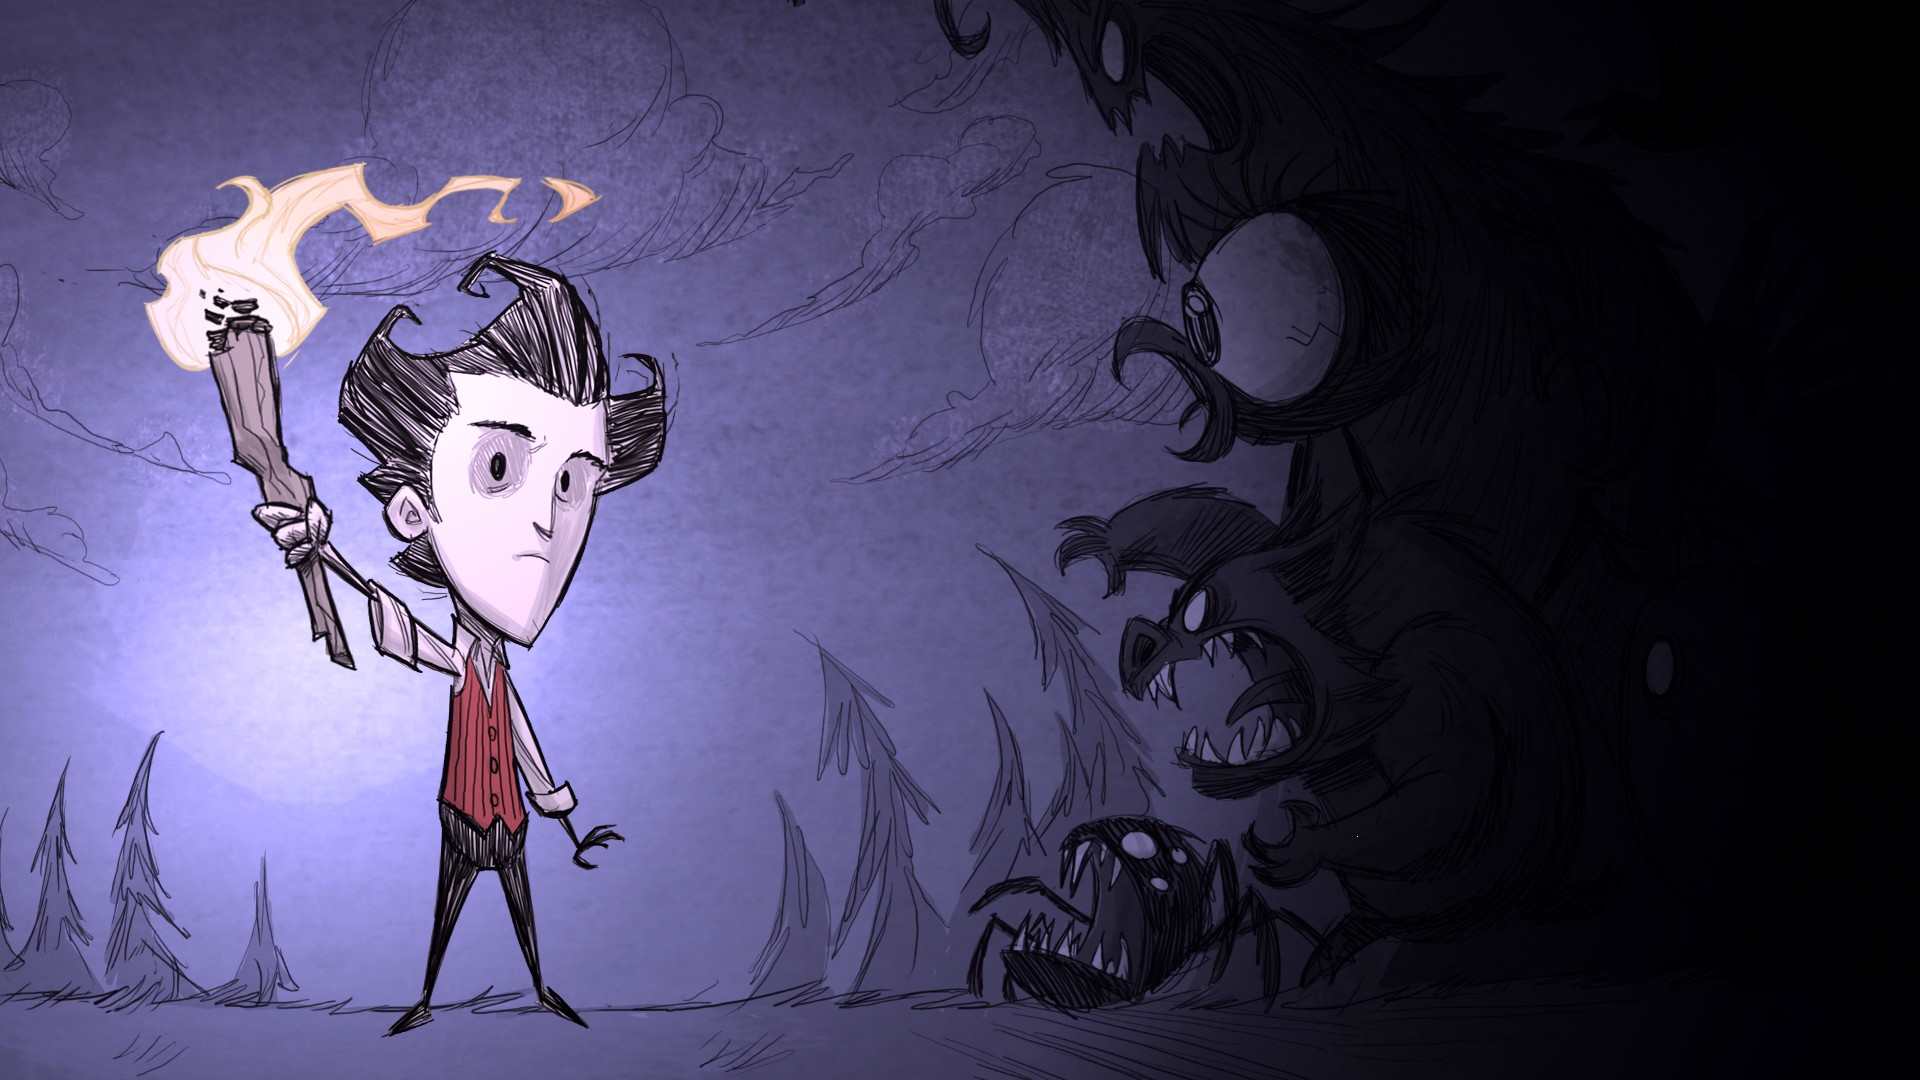 Донт старв длс. Don't Starve together фон. Уилсон don't Starve. ДСТ игра.